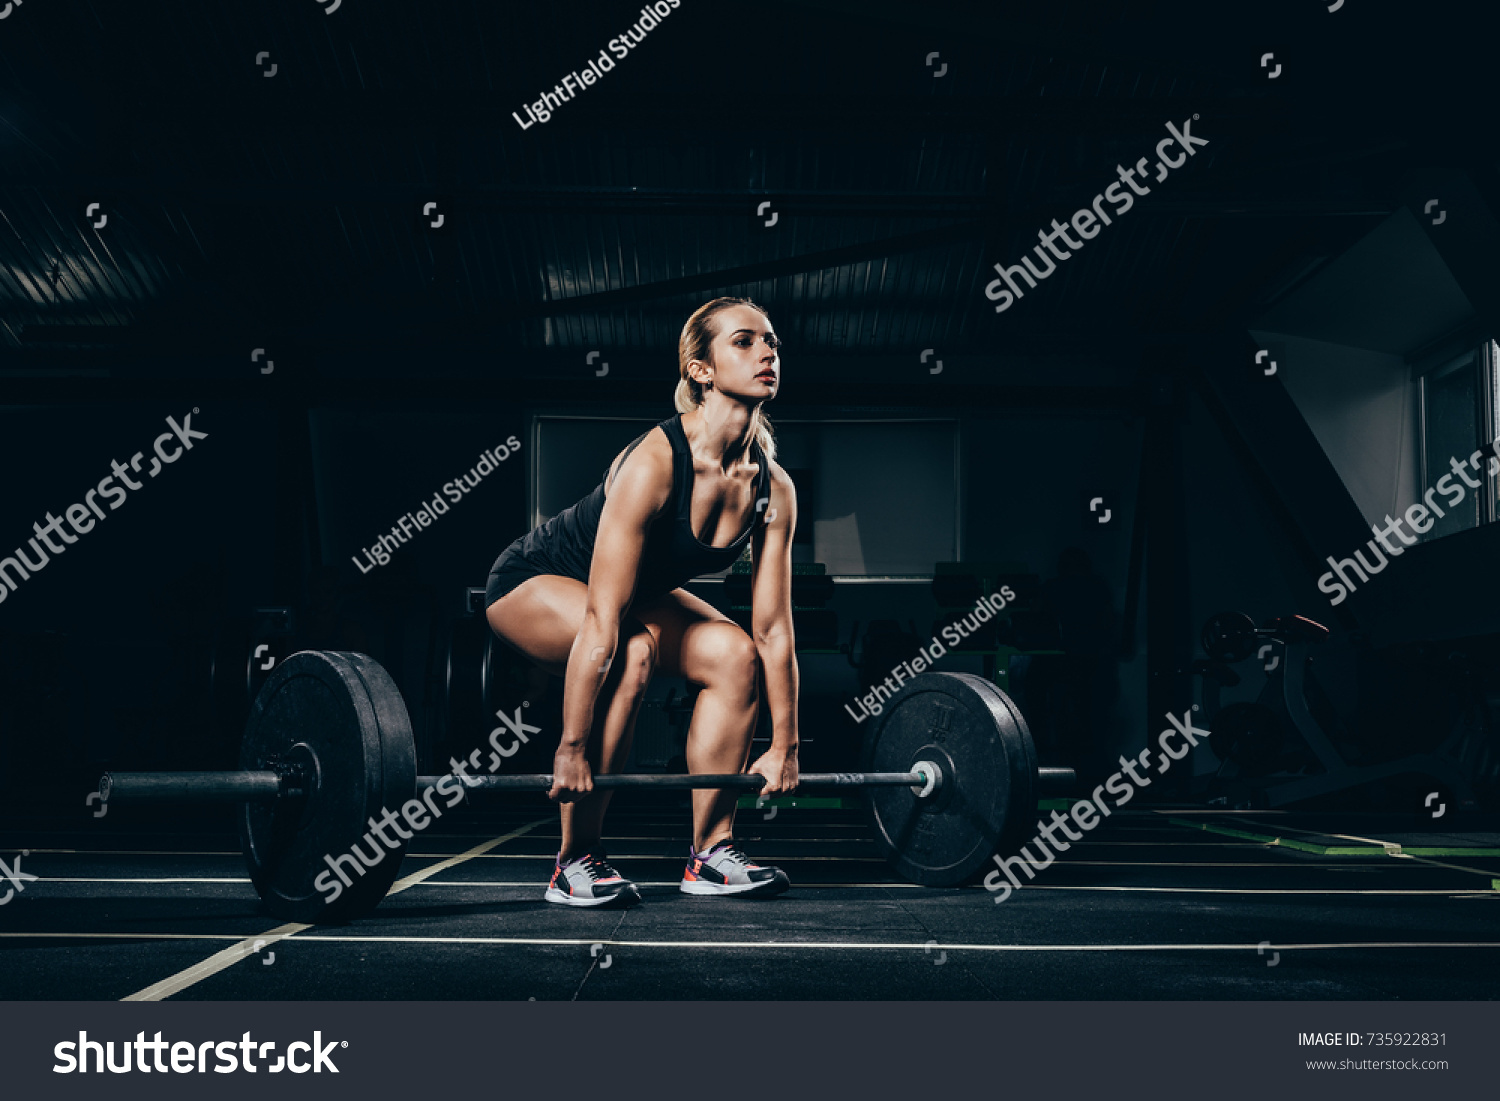 Young Athletic Sportswoman Squatting While Lifting Stock Photo ...